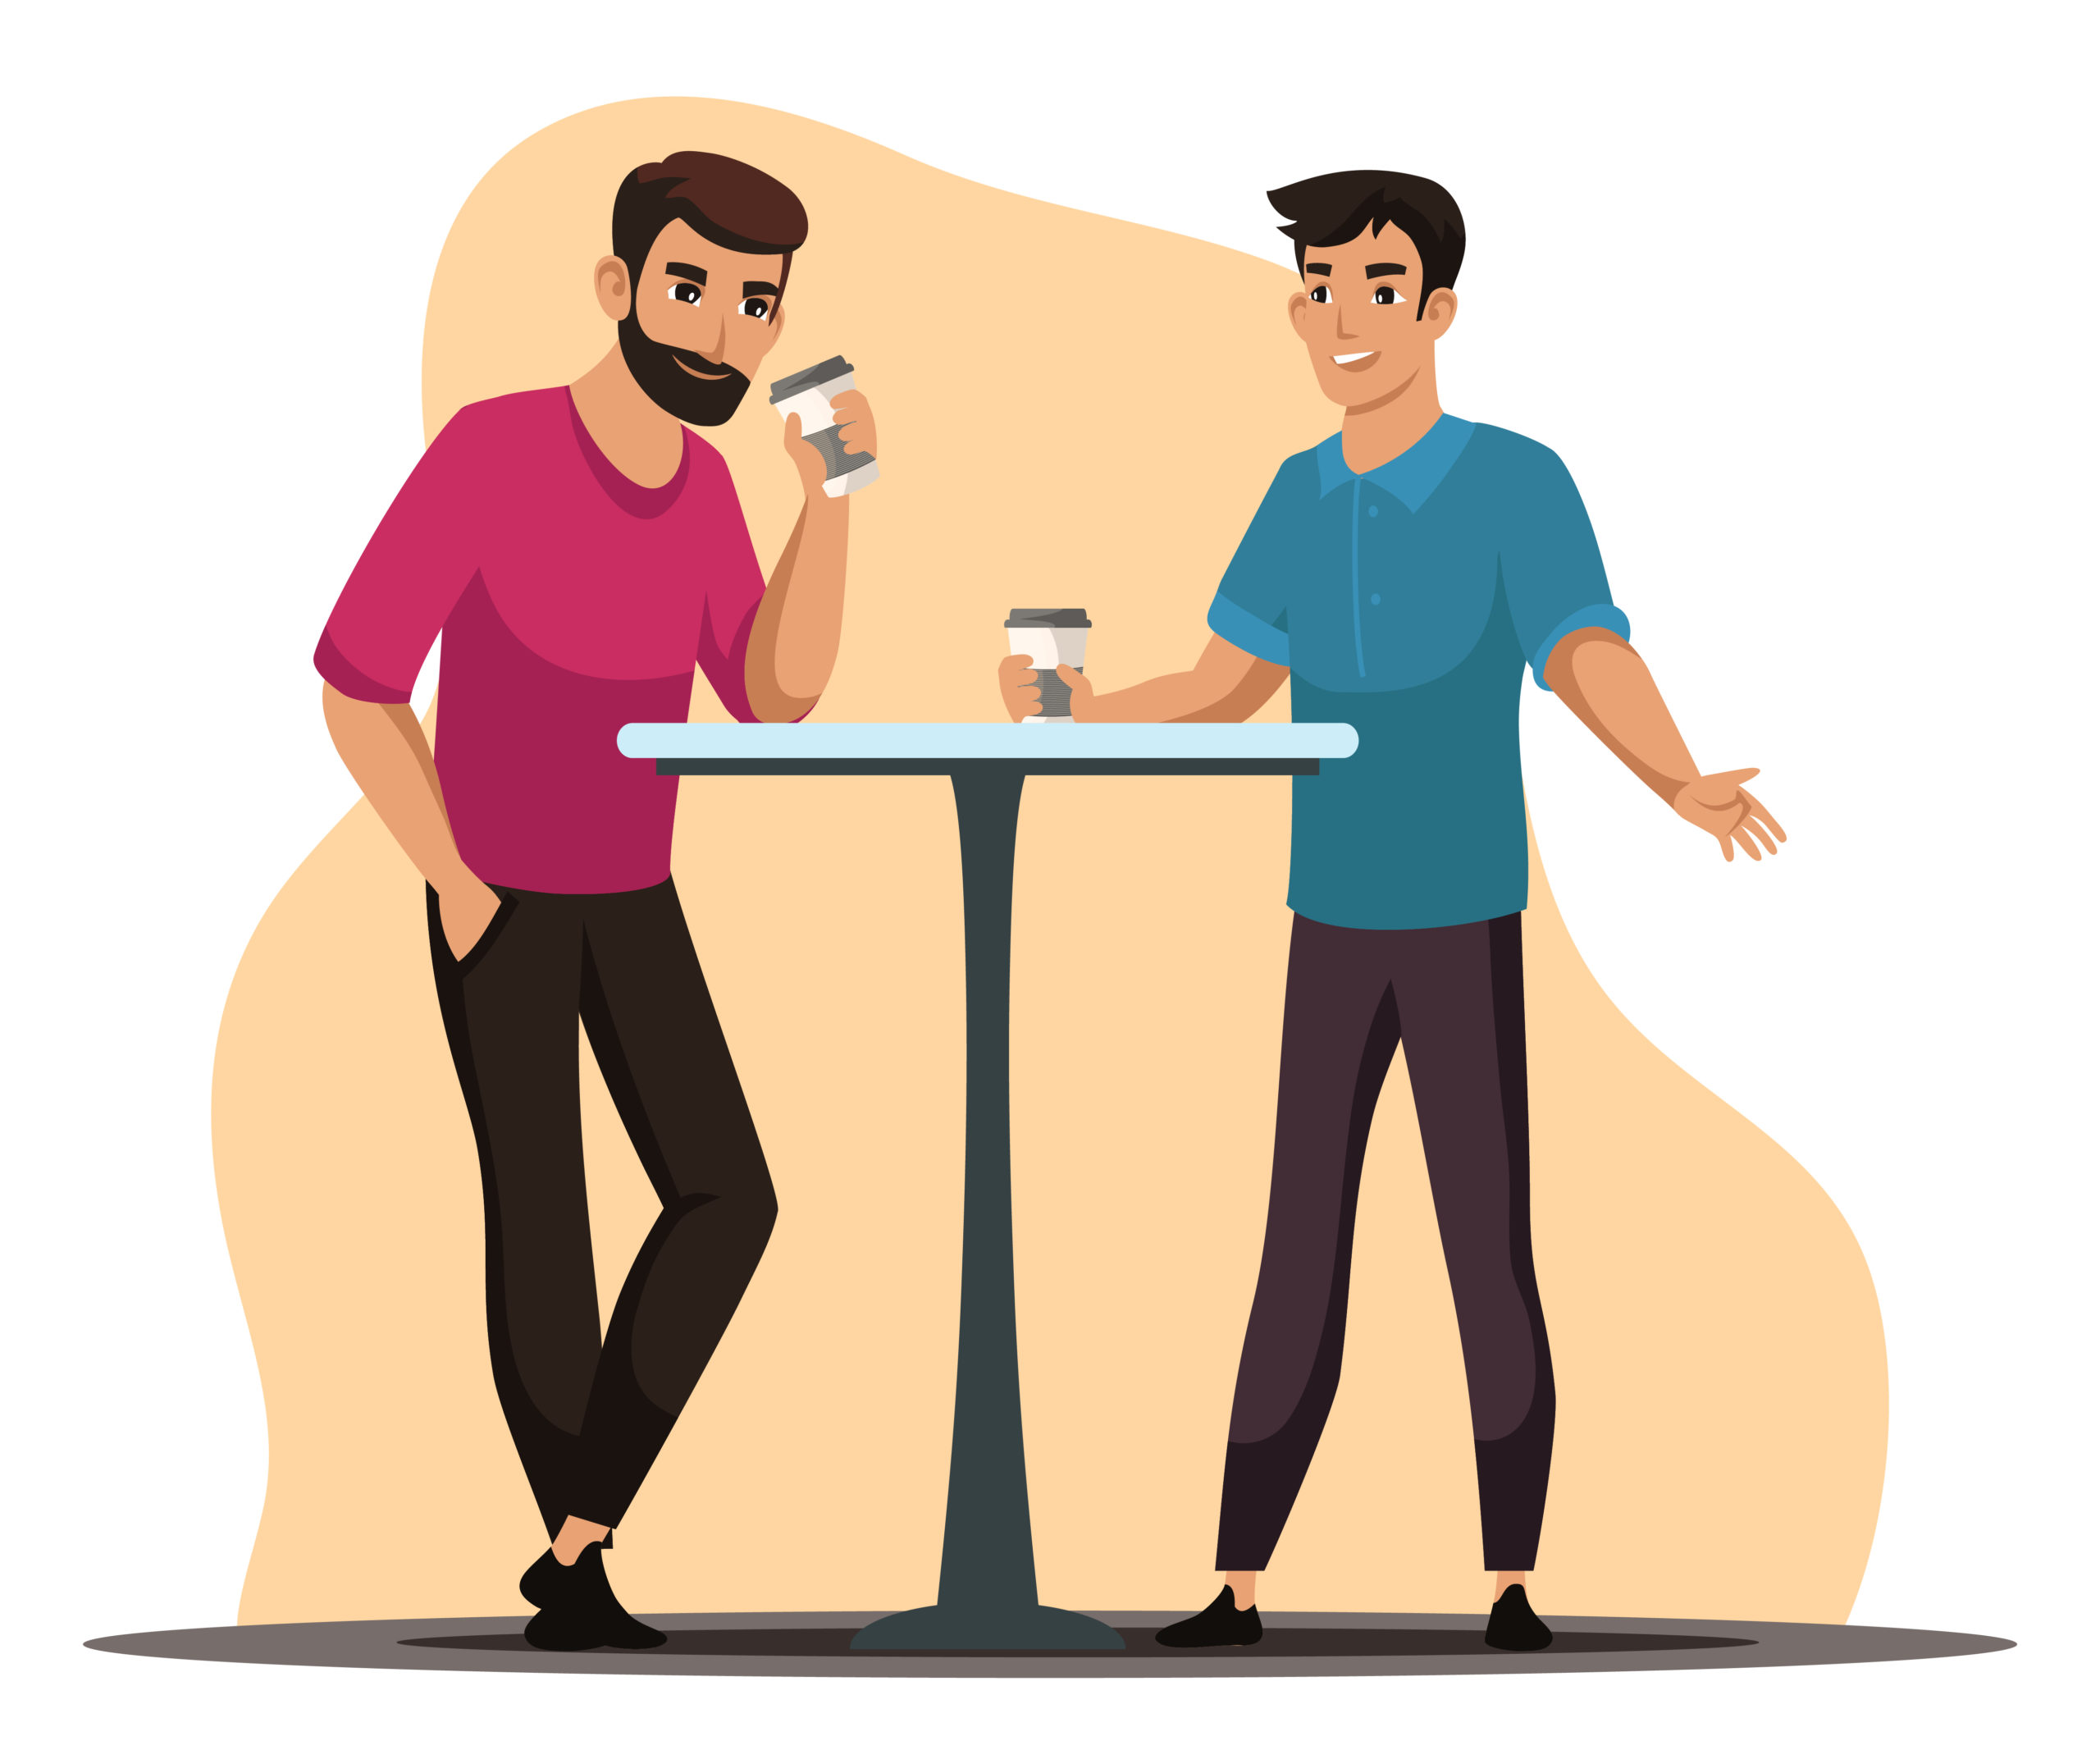 coffee break concept, two men stand at table in cafe, relaxing in cafeteria. friends or colleagues meeting in bistro, drinking beverage, communicate, pastime together.